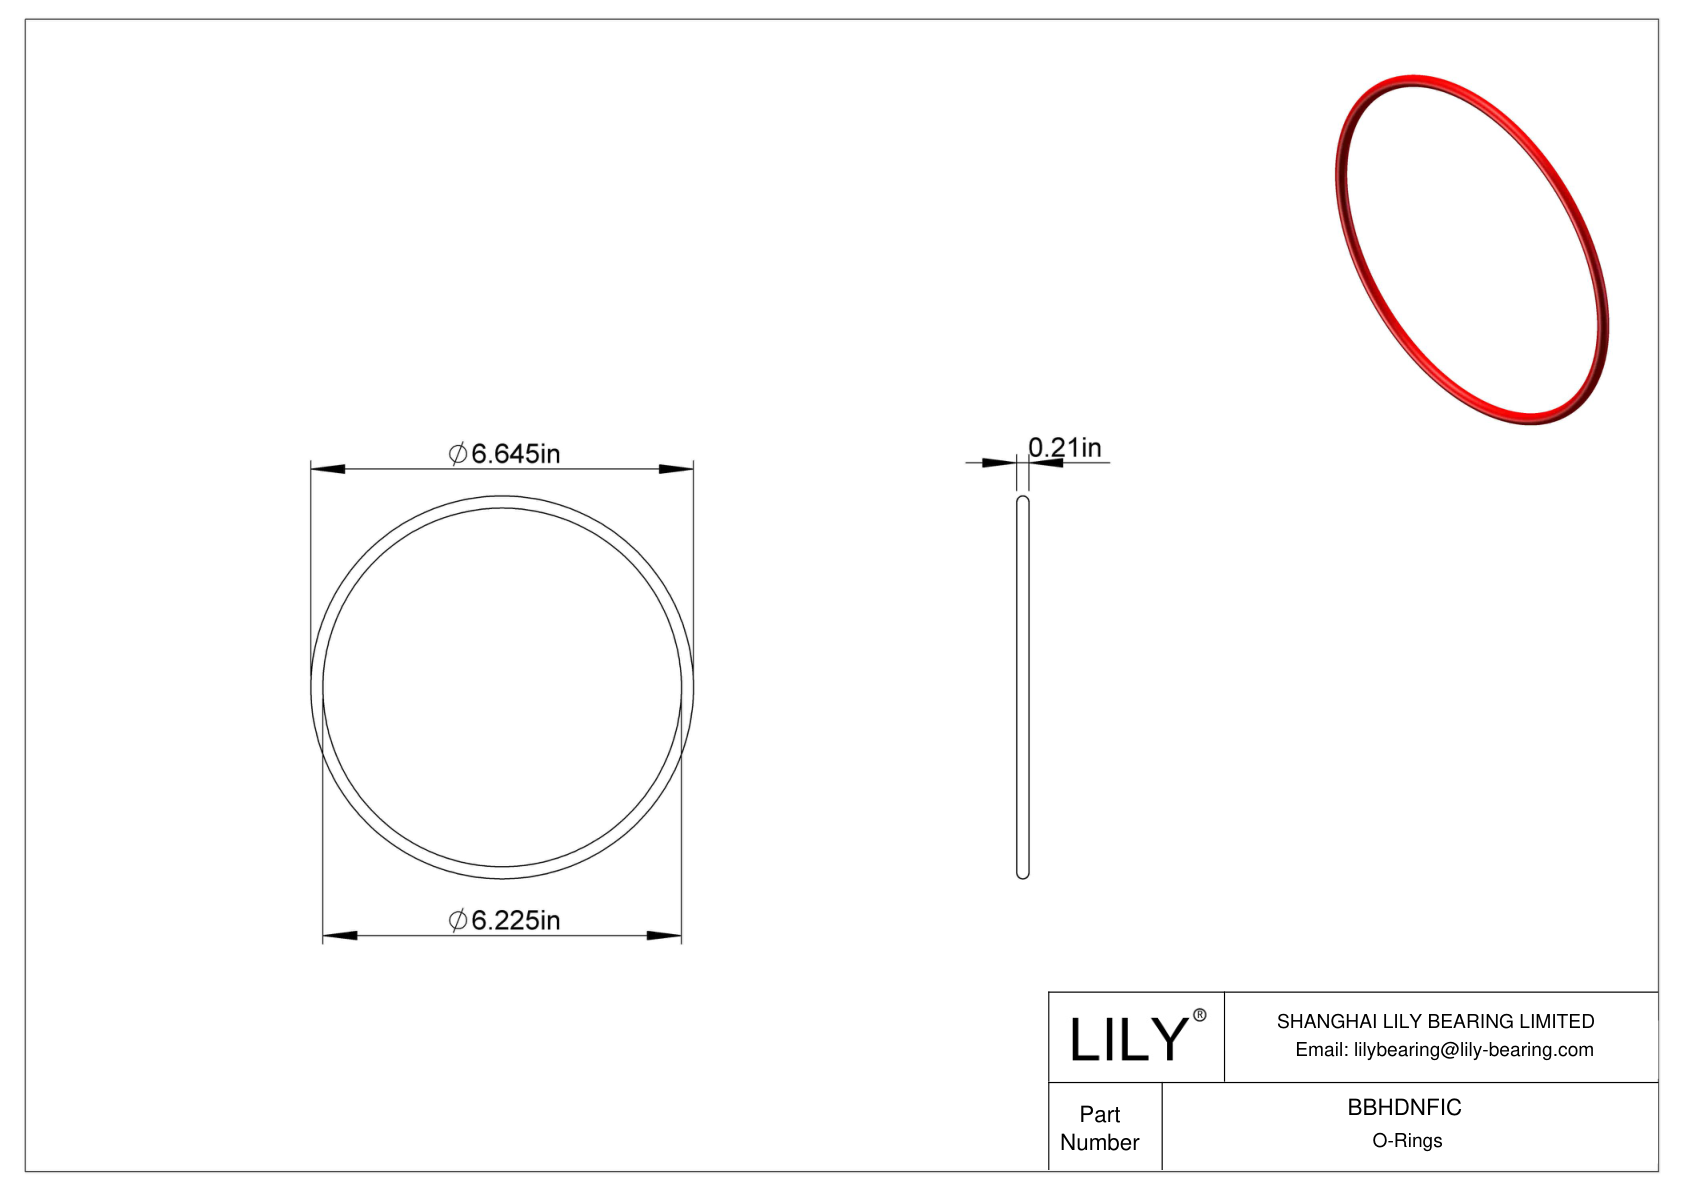 BBHDNFIC High Temperature O-Rings Round cad drawing